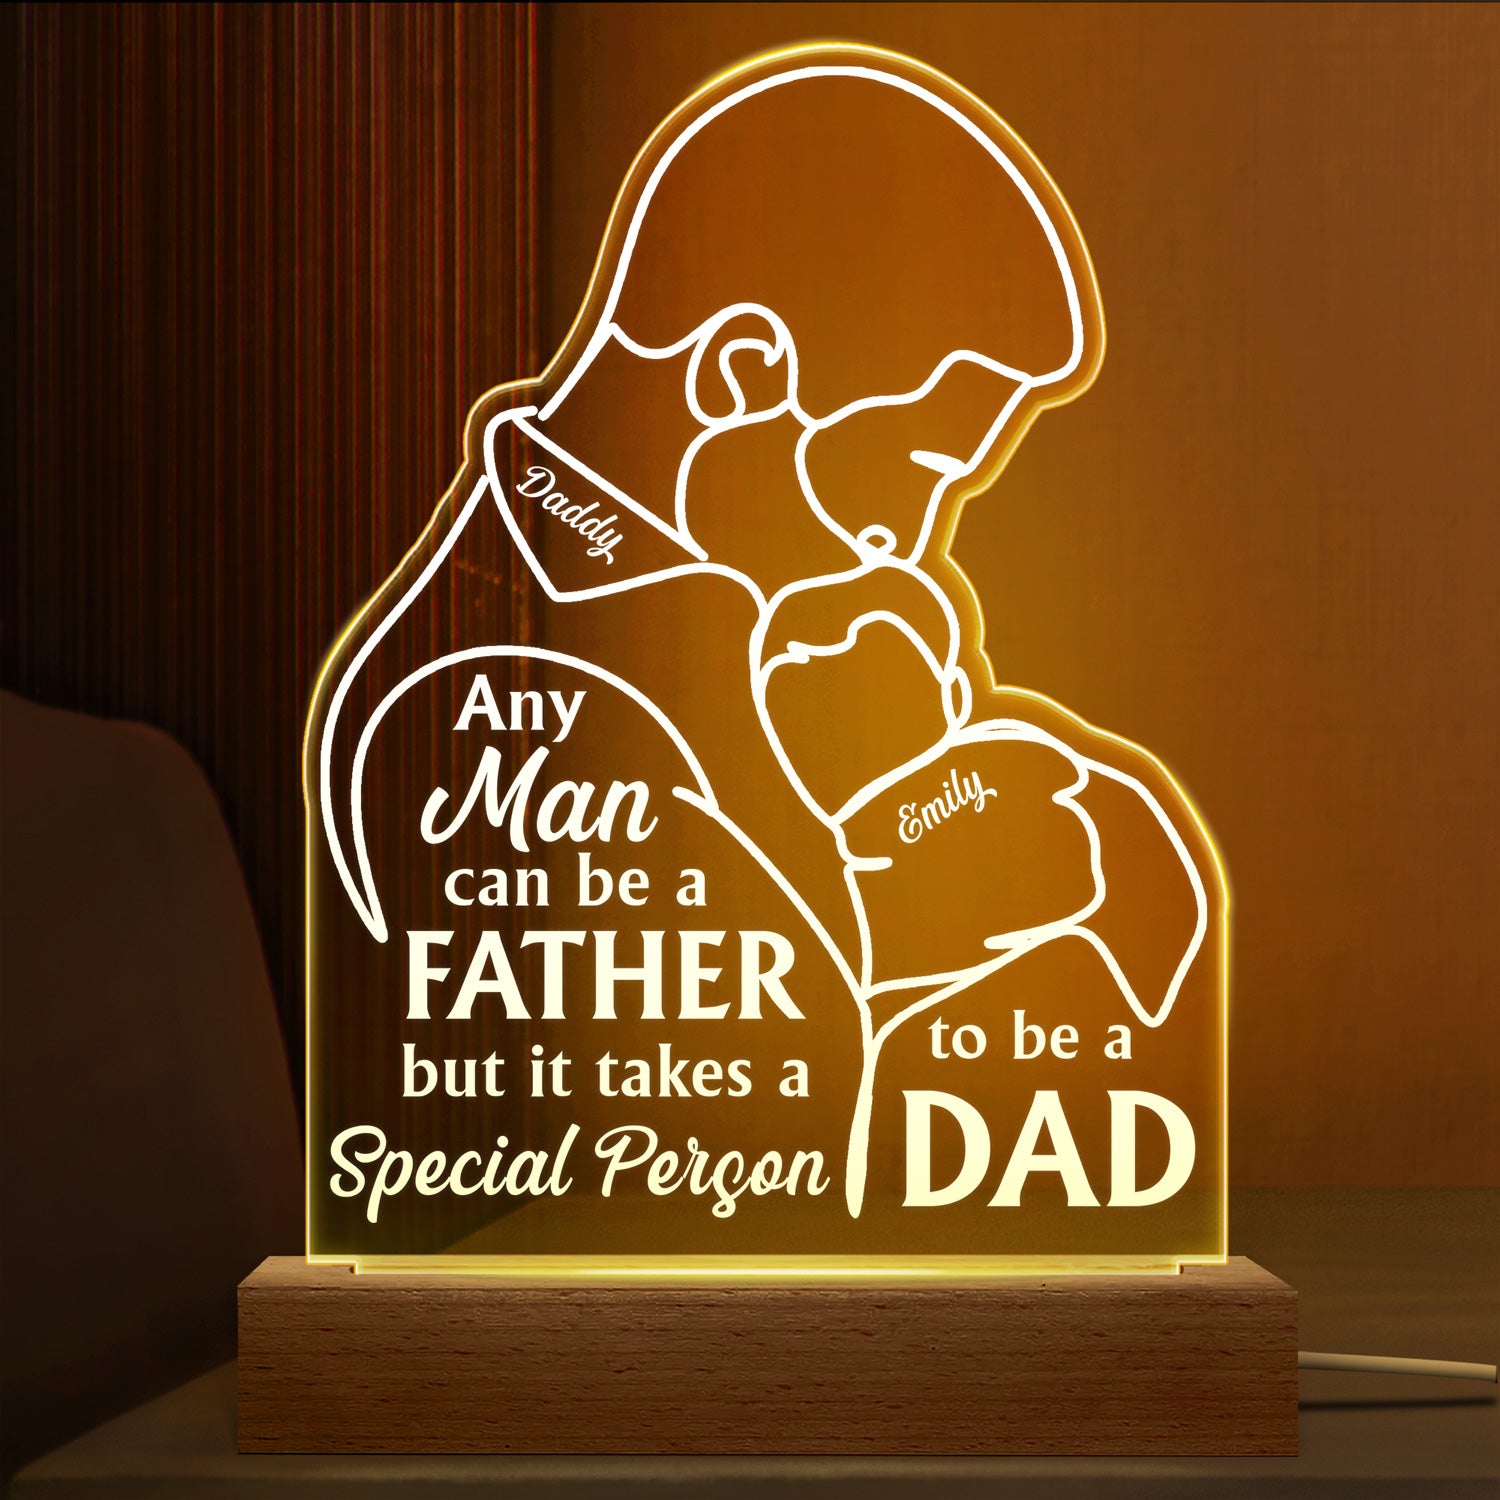 It Takes A Special Person To Be A Dad - Birthday, Loving, Decor Gift For Father, Grandpa, Grandfather - Personalized Custom 3D Led Light Wooden Base